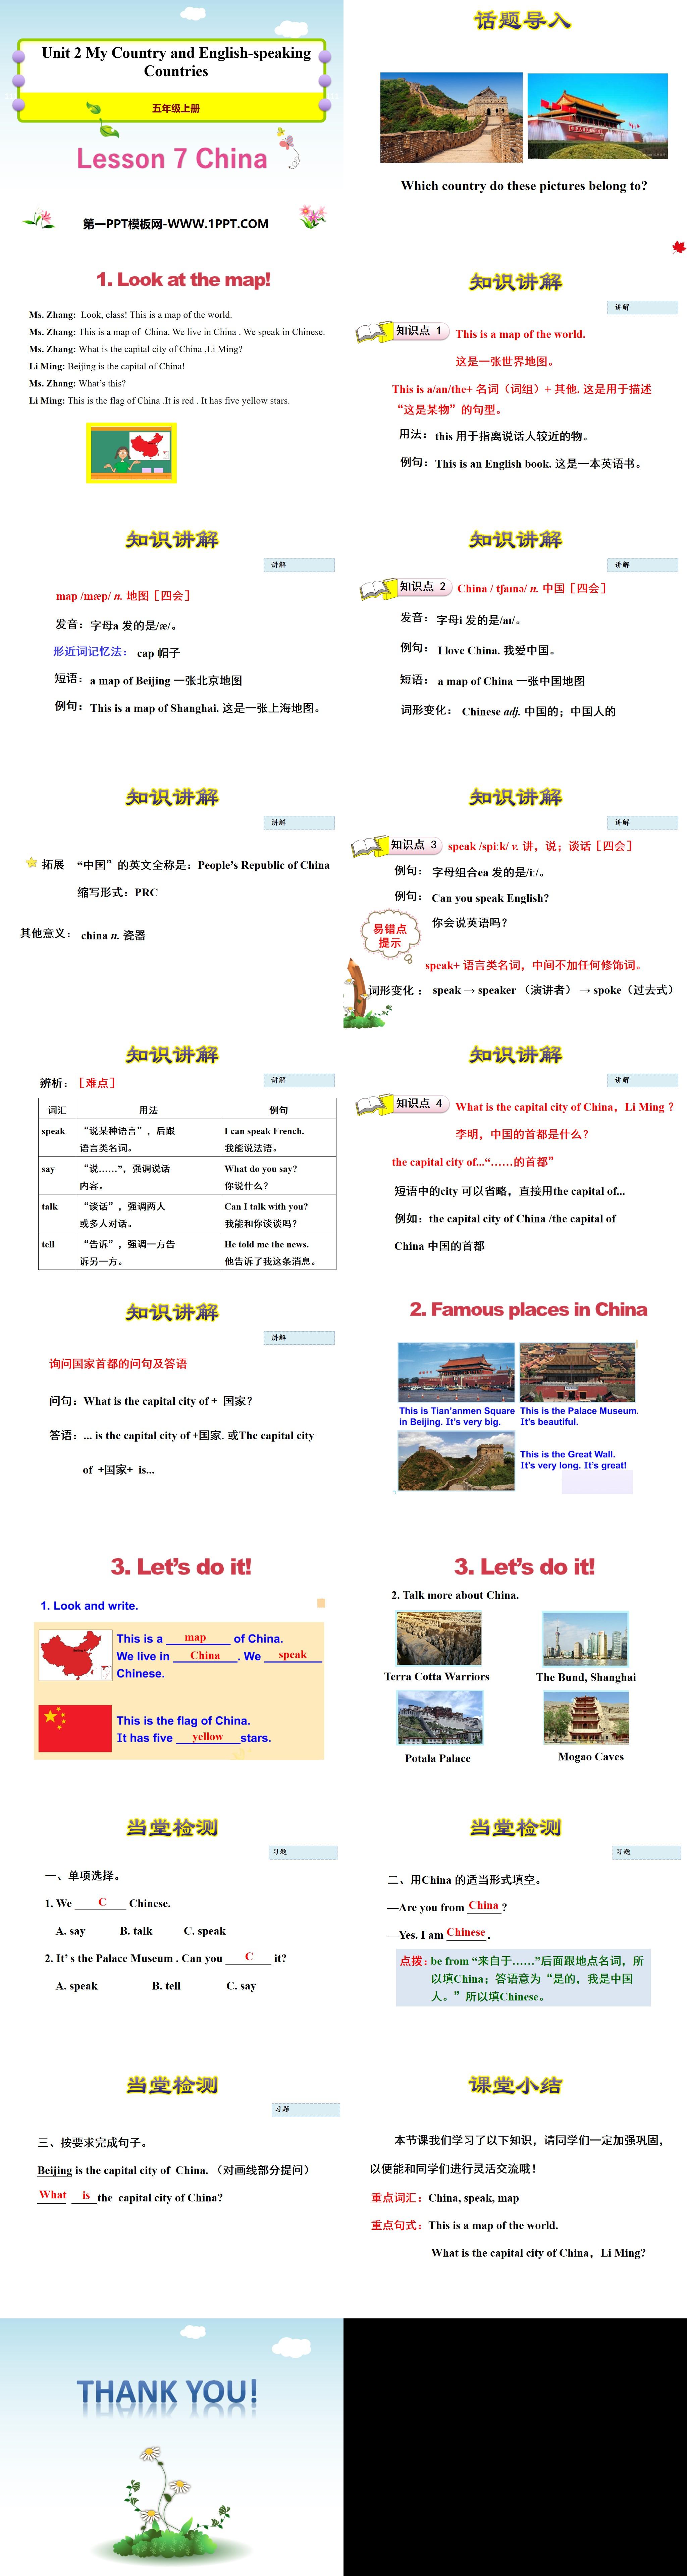 《China》My Country and English-speaking Countries PPT教学课件
（2）